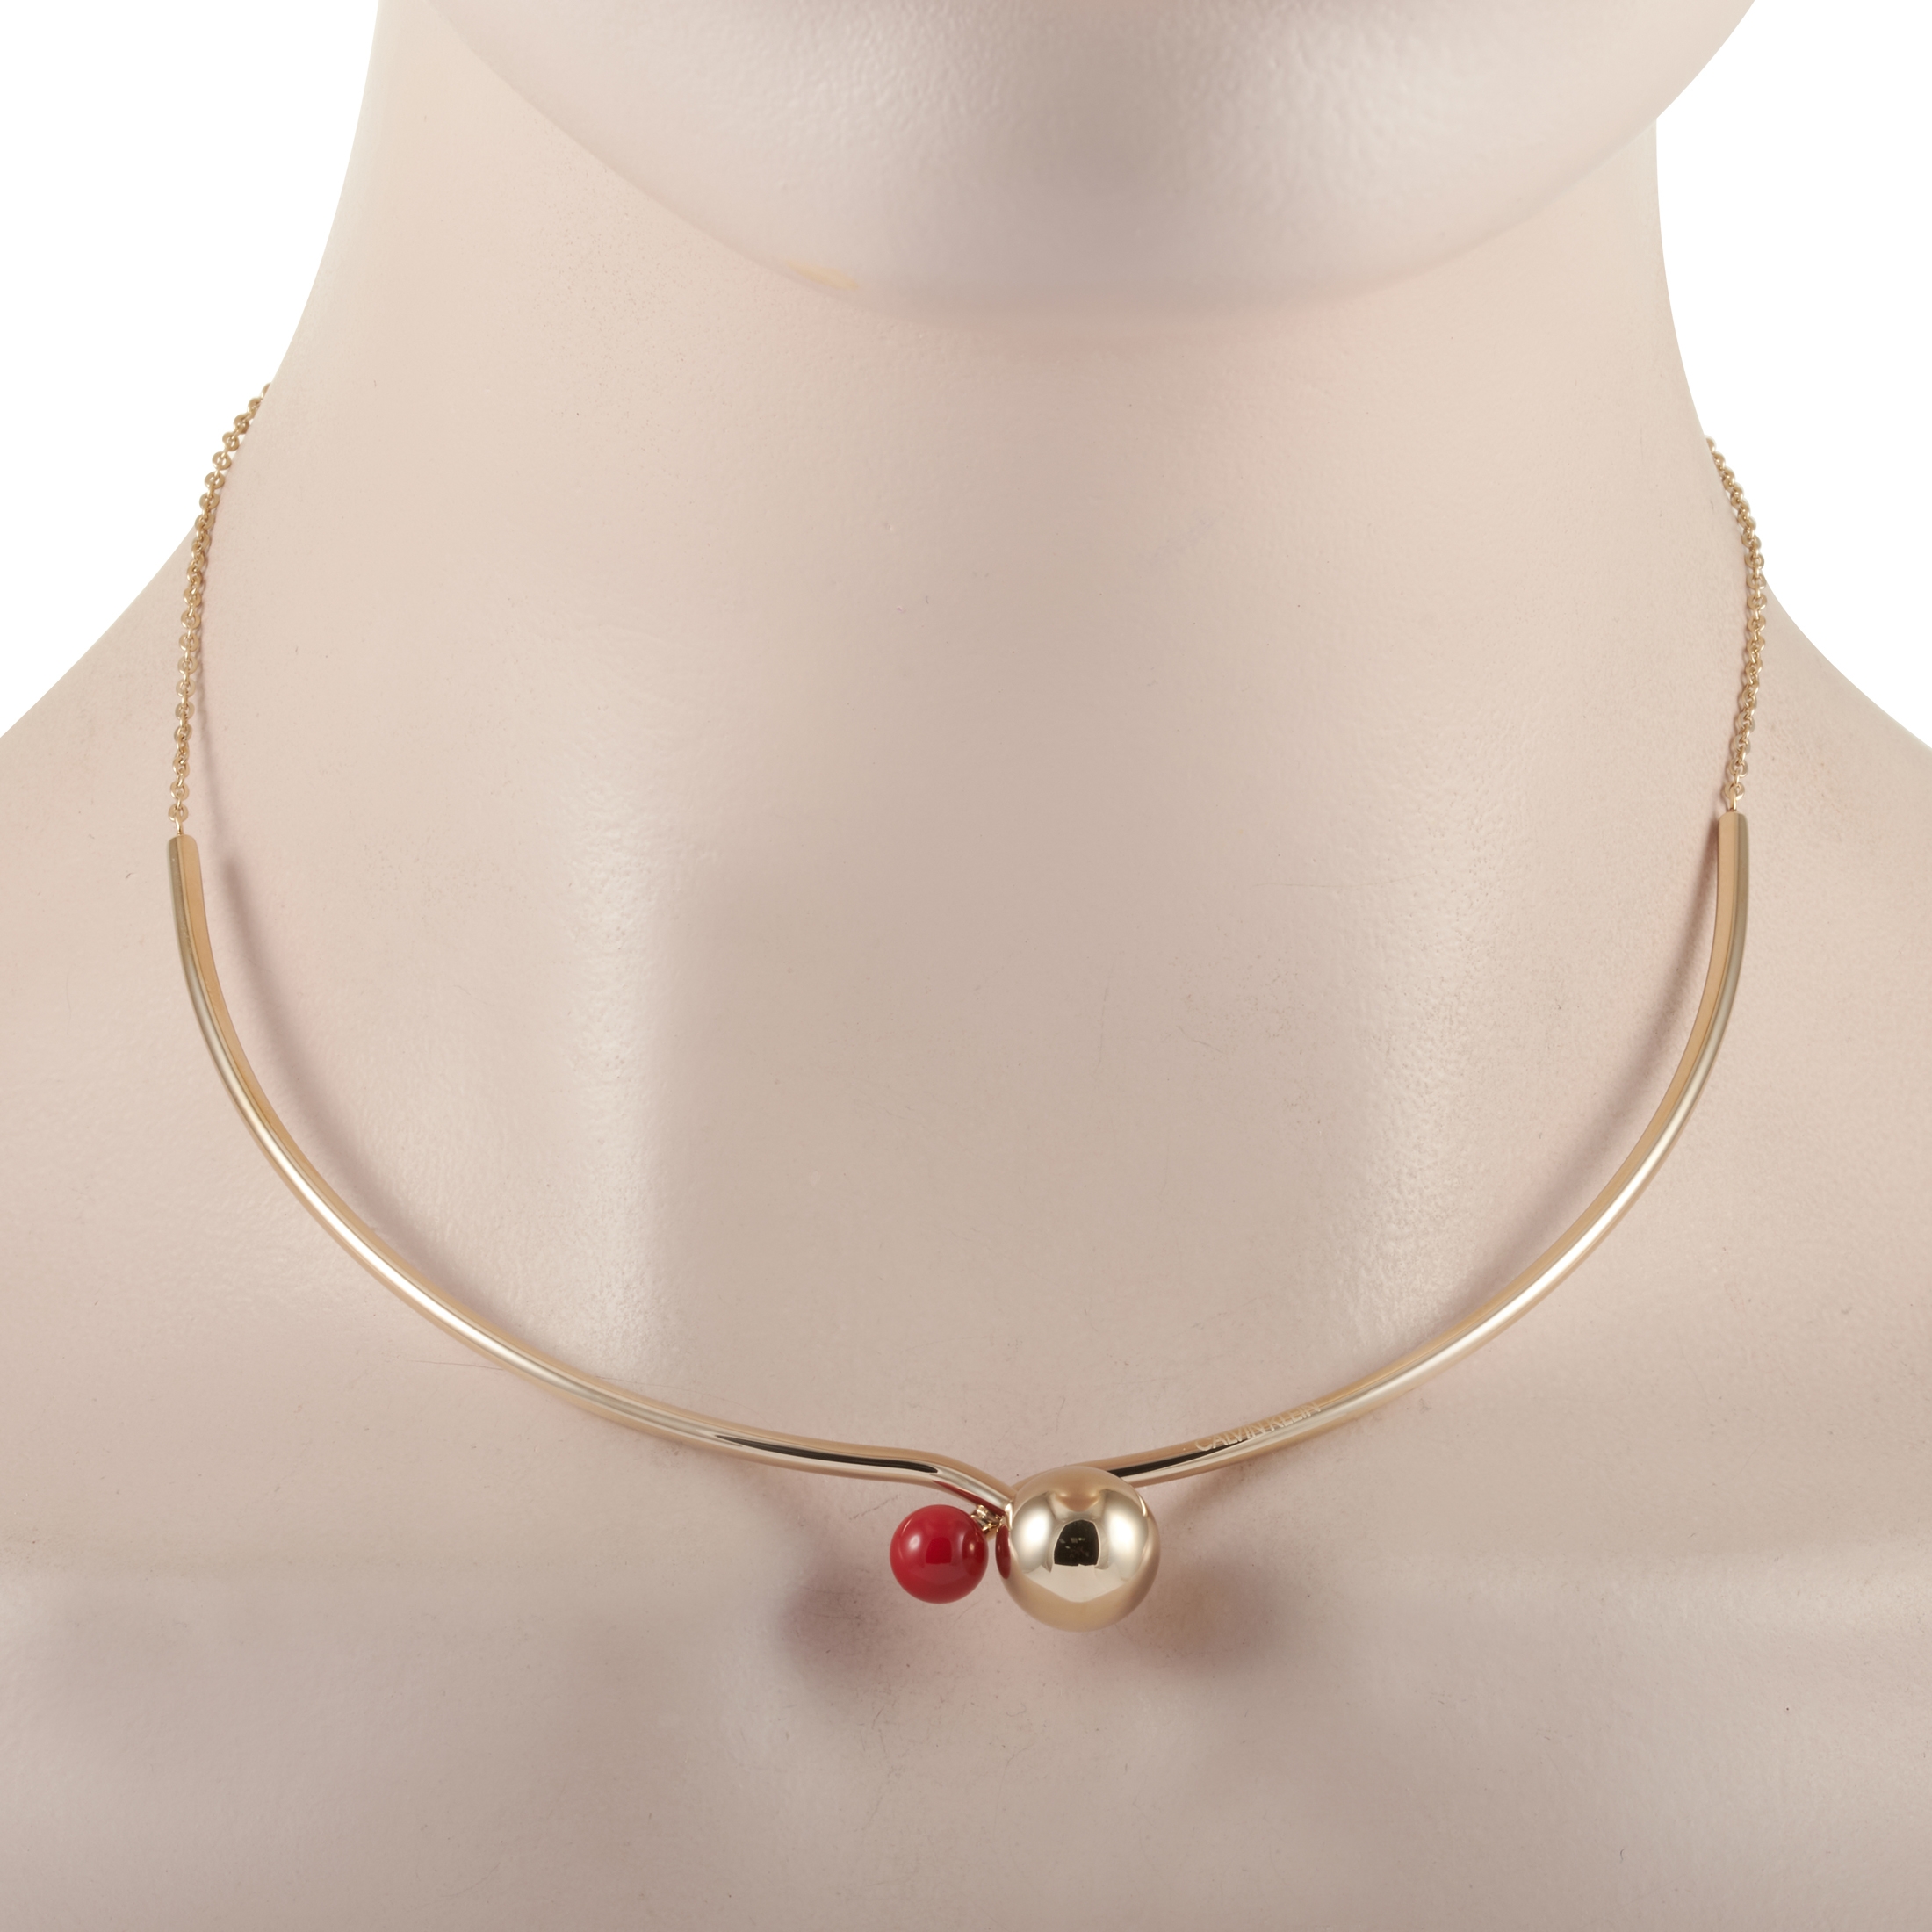 Calvin Klein Bubbly Champagne Gold PVD-Plated Stainless Steel Red Bead Necklace KJ9RJJ140200